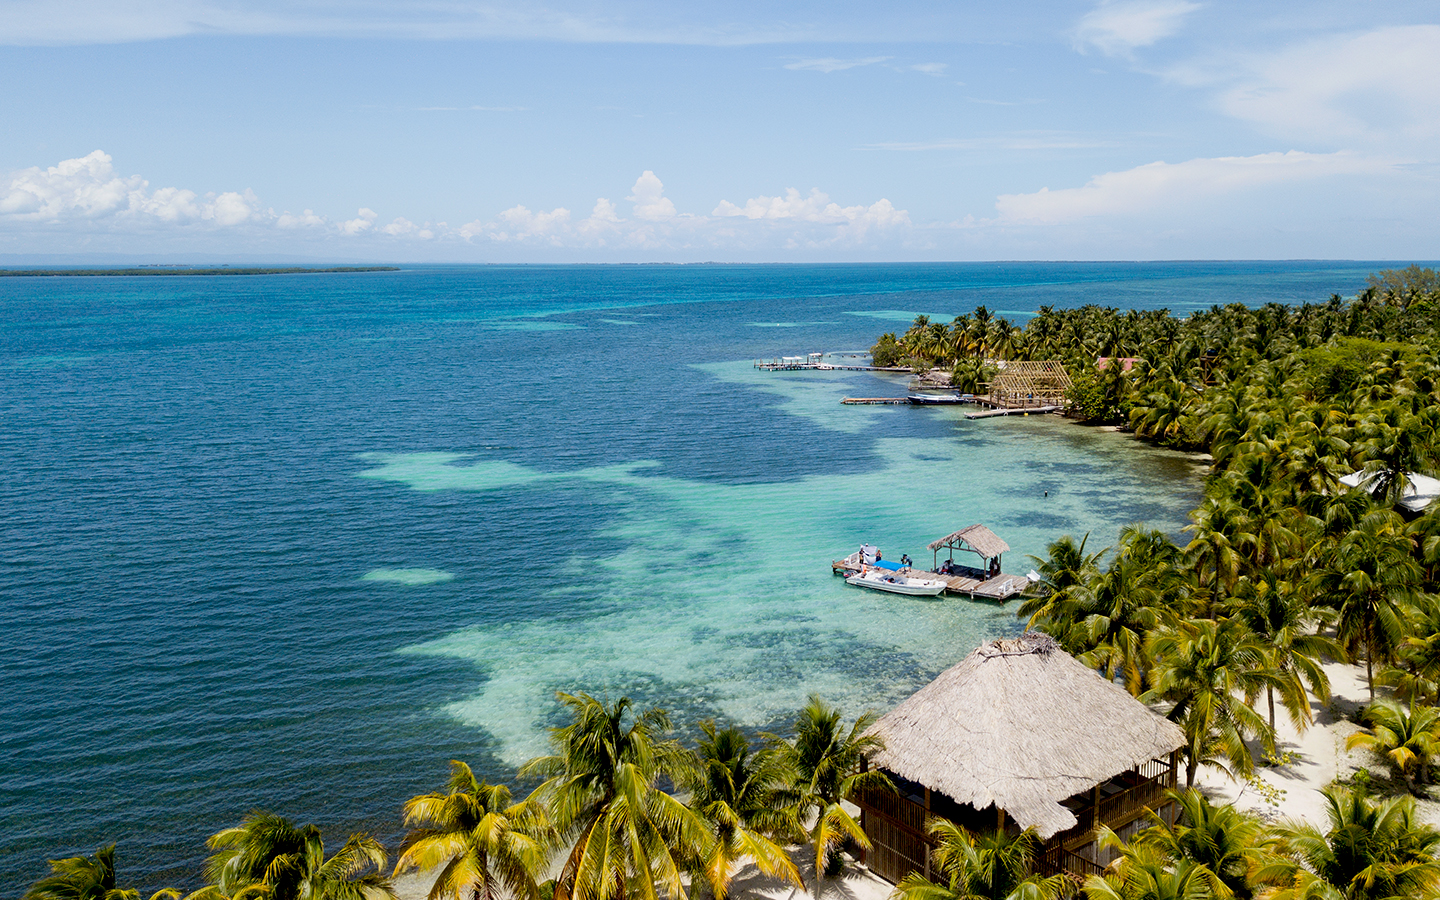 A bright sunny day in Belize with blue clear sky, crystal clear calm ocean and an island shoreline of dense palm trees.